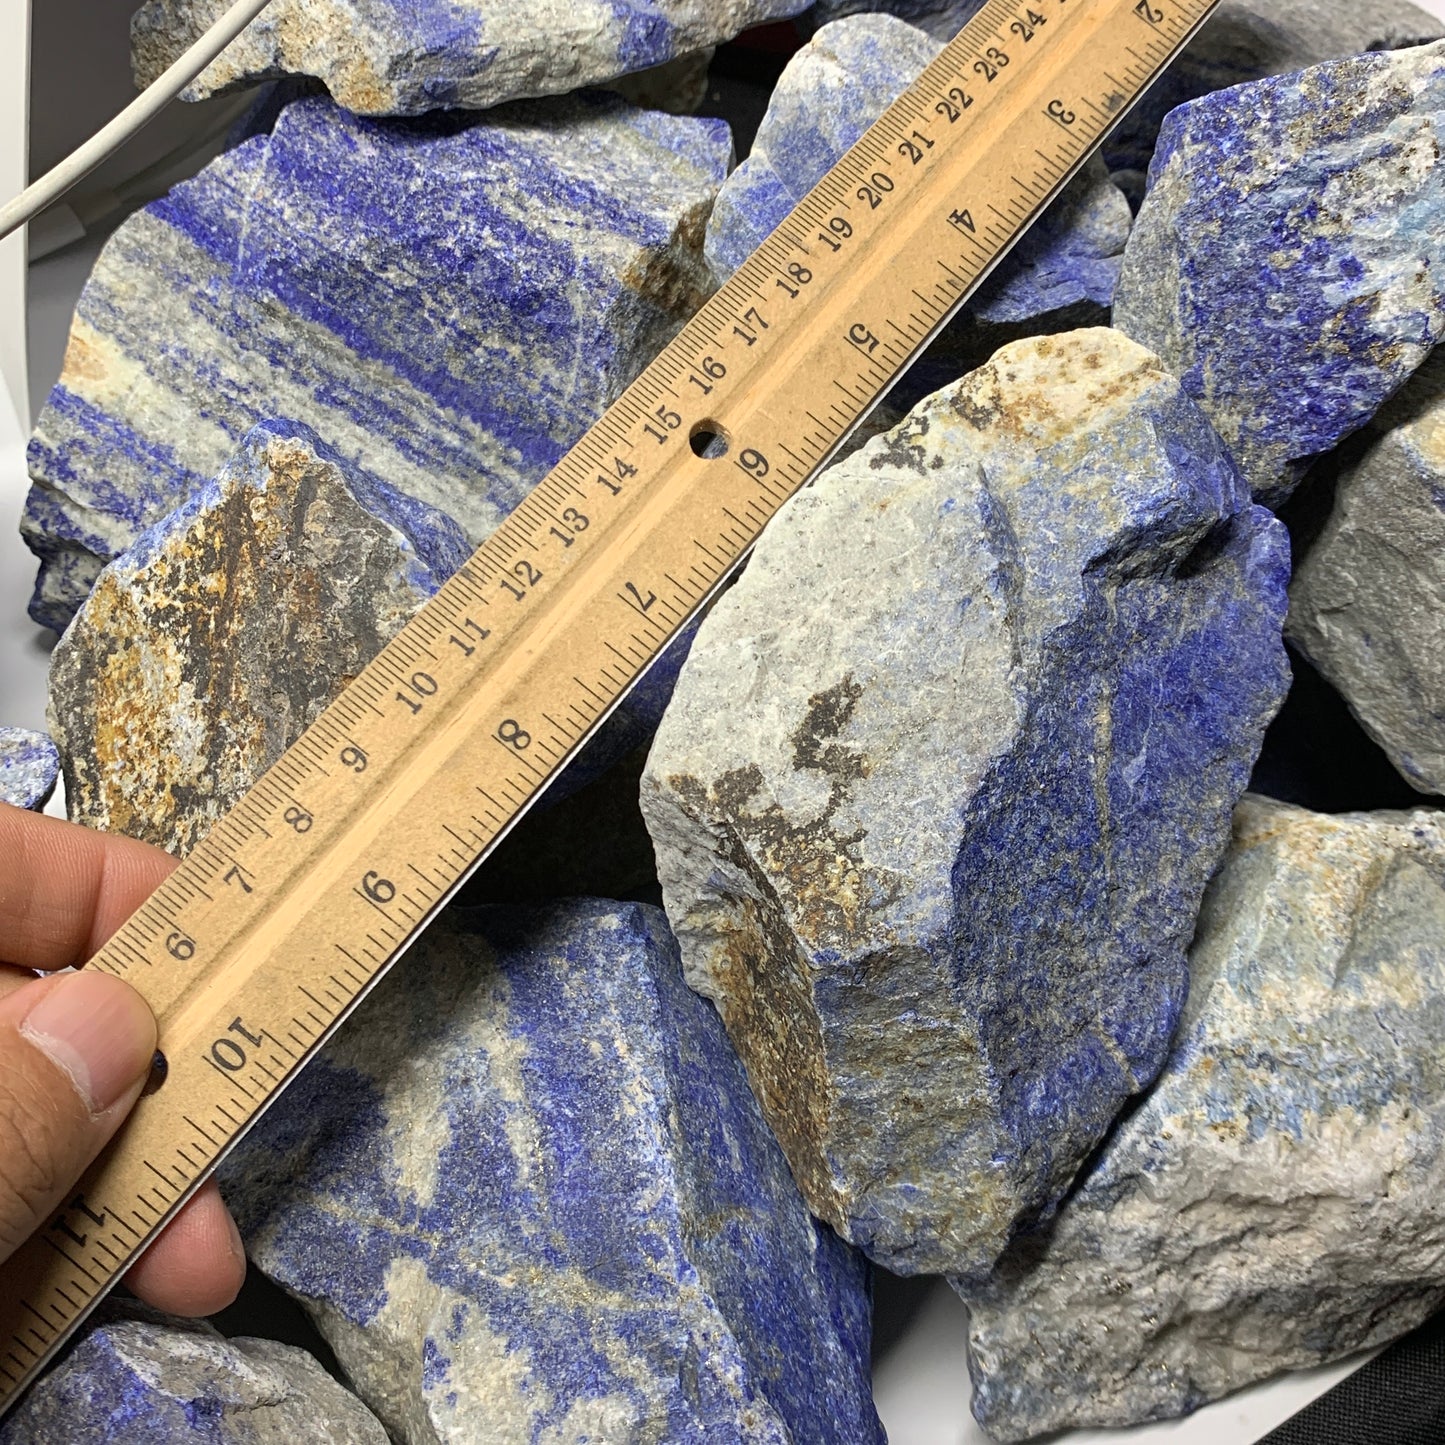 22 lbs (10 Kg) Rough Lapis Lazuli from Afghanistan